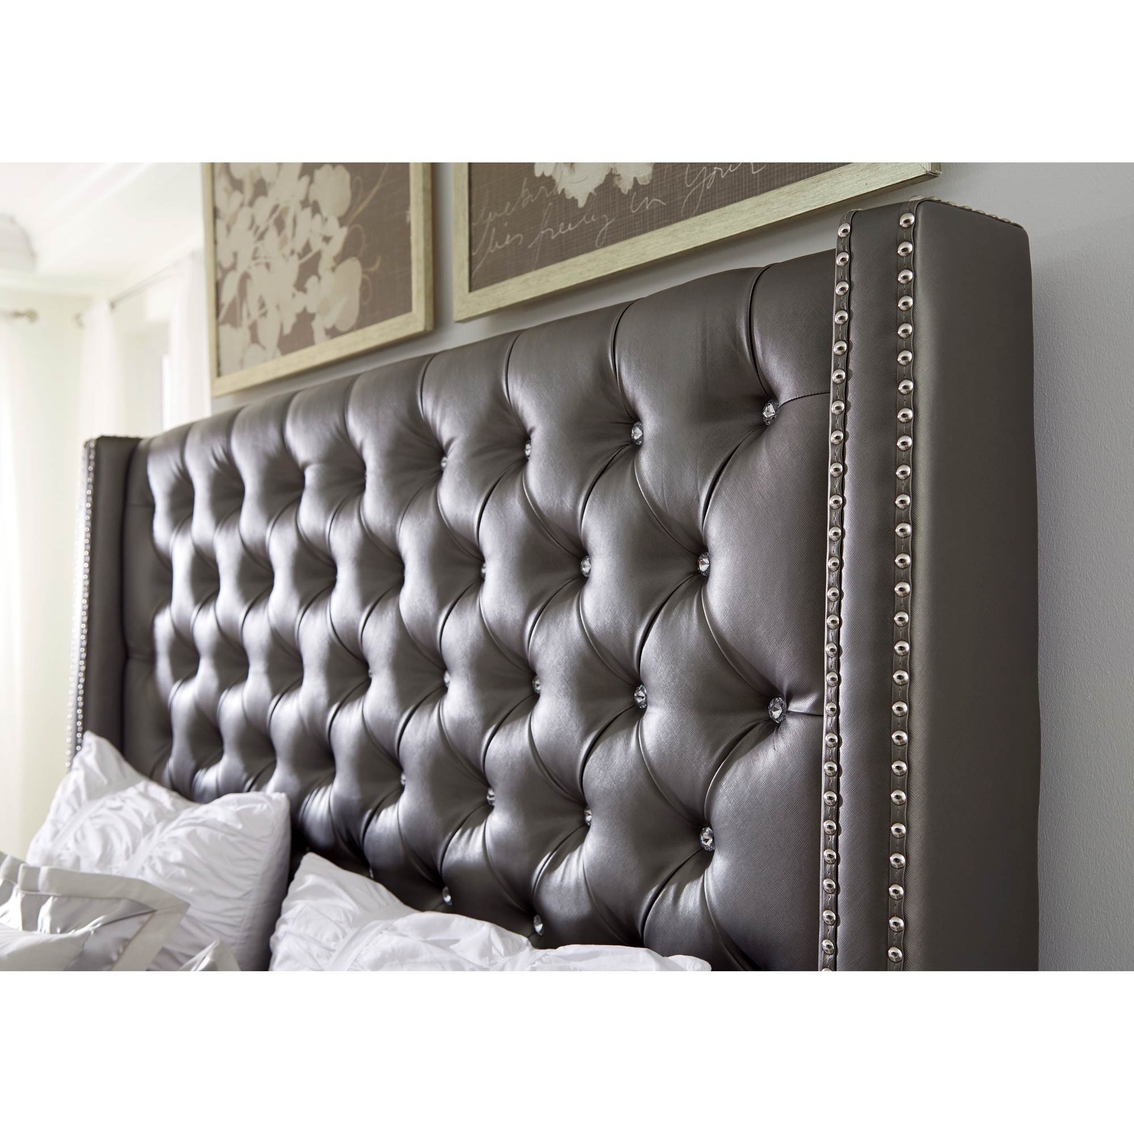 Signature Design by Ashley Coralayne Upholstered Bed - Image 2 of 4